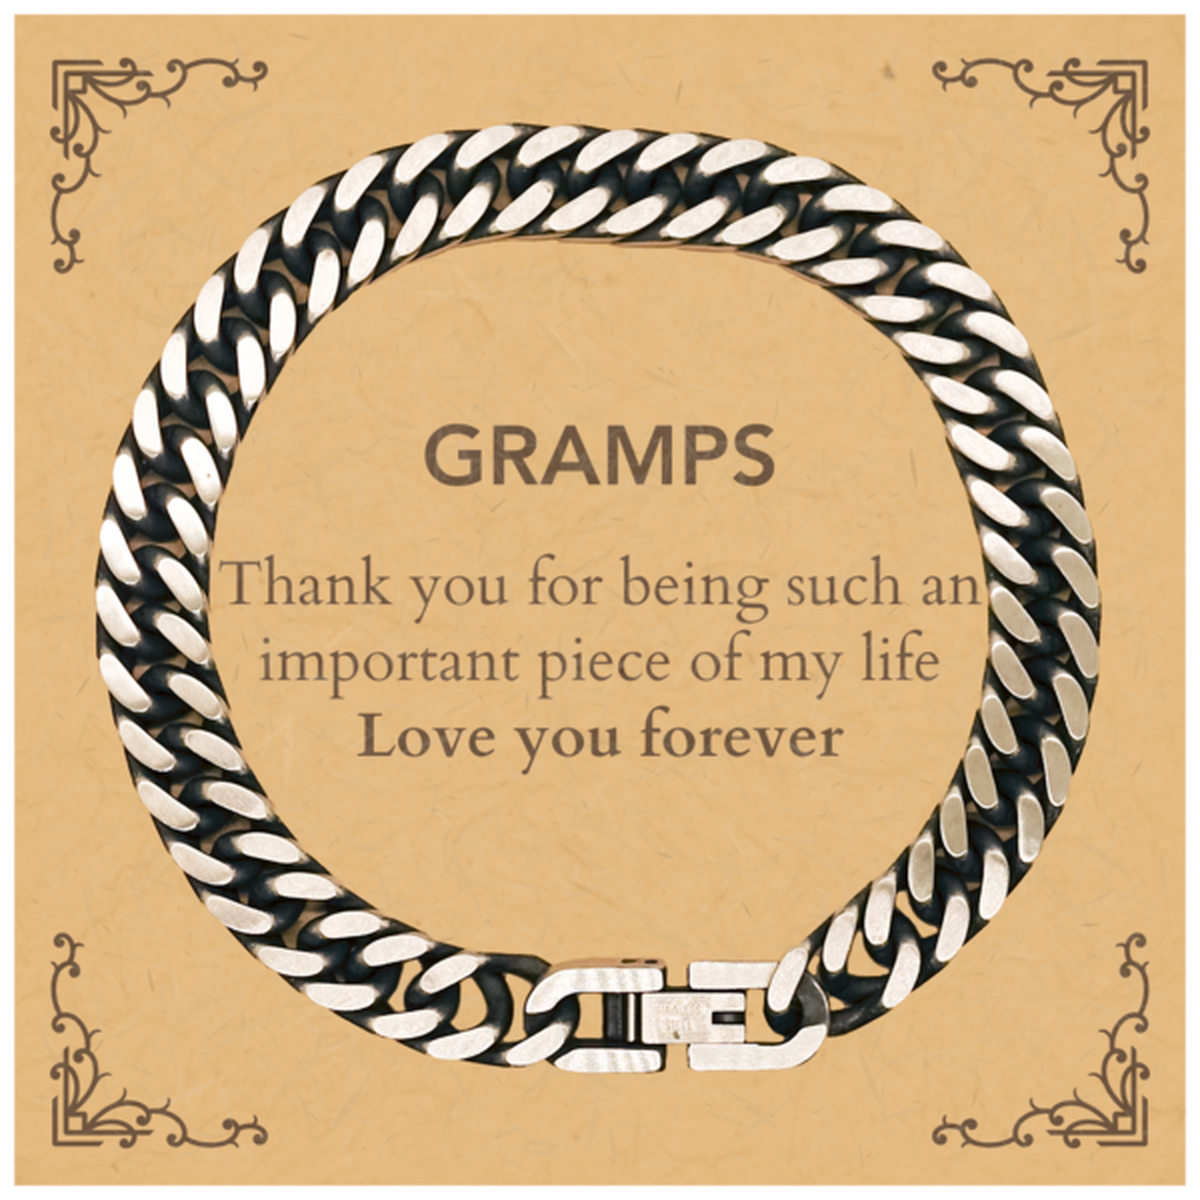 Appropriate Gramps Cuban Link Chain Bracelet Epic Birthday Gifts for Gramps Thank you for being such an important piece of my life Gramps Christmas Mothers Fathers Day